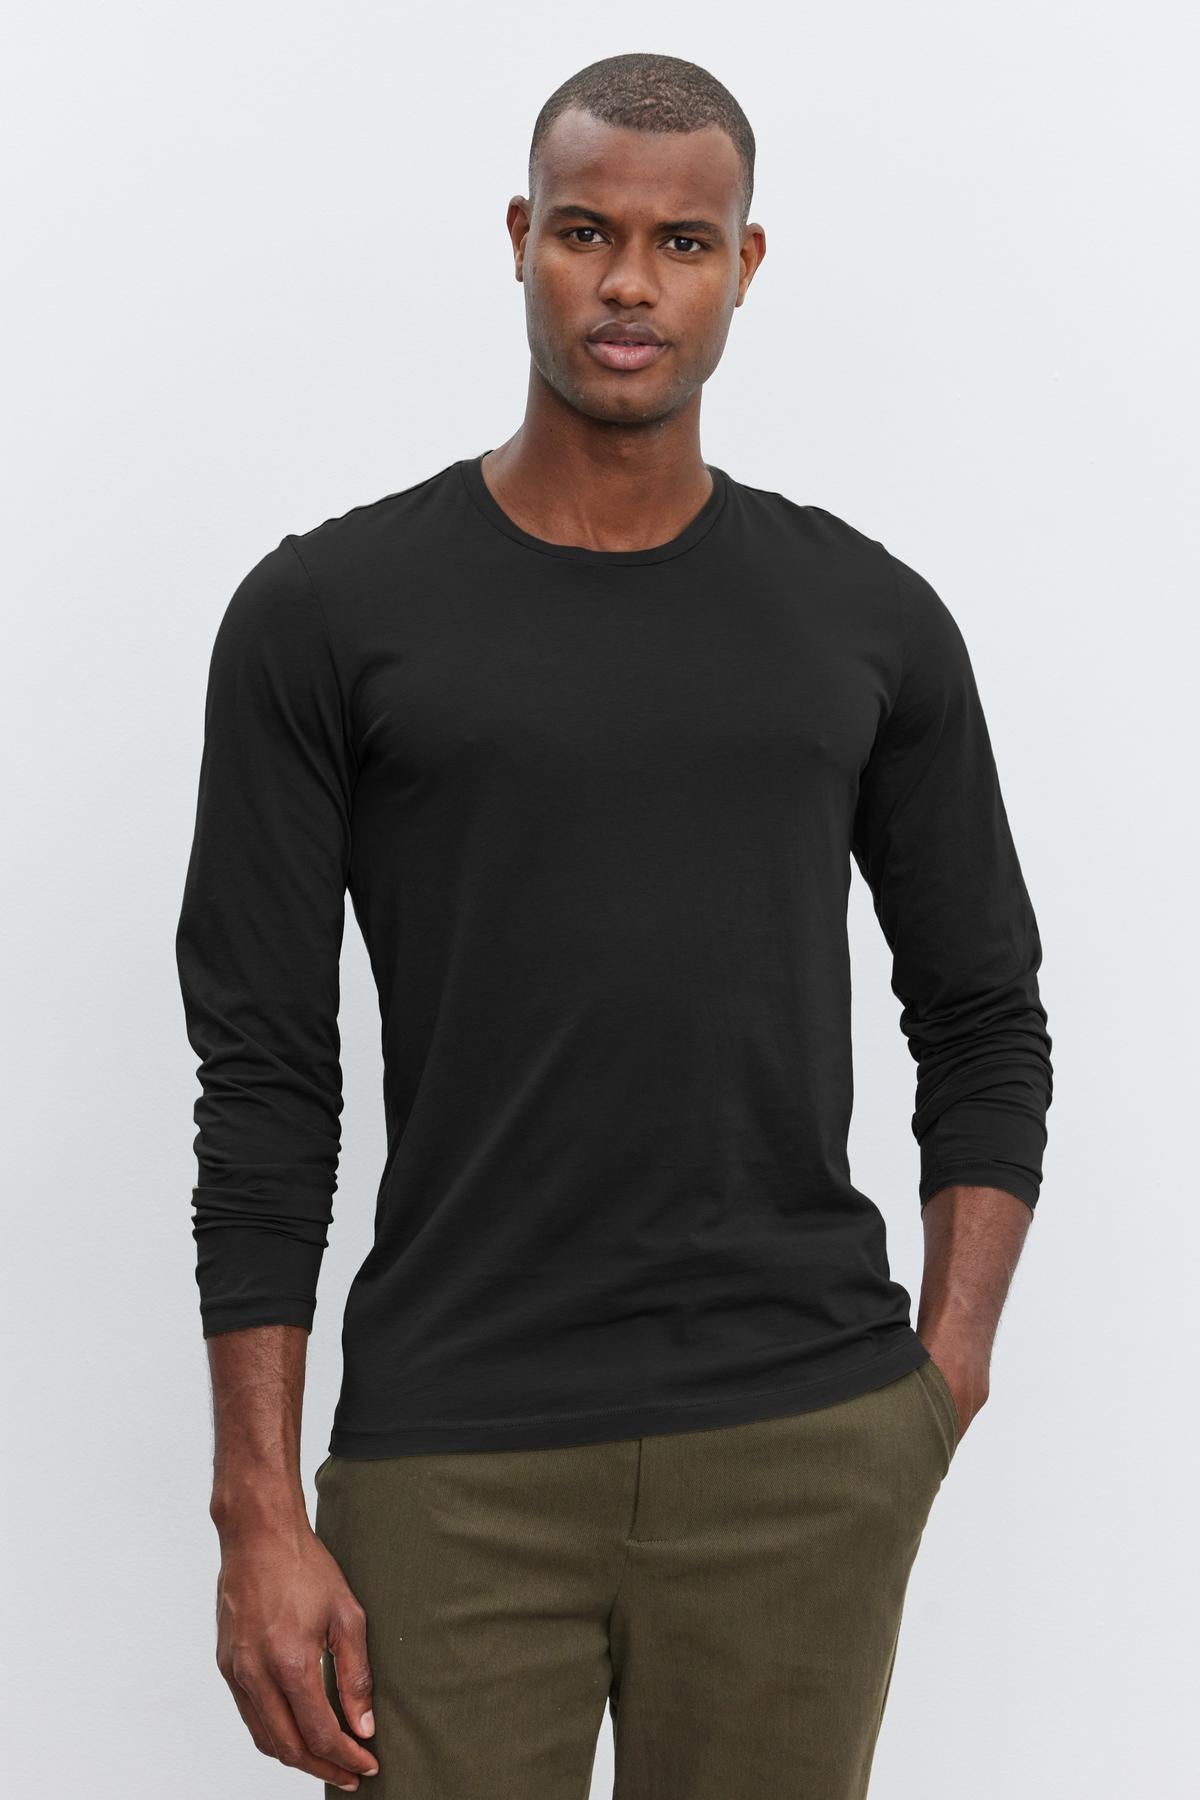   A young man in a black Velvet by Graham & Spencer SKEETER WHISPER CLASSIC CREW NECK TEE and olive green pants, standing against a white background. 